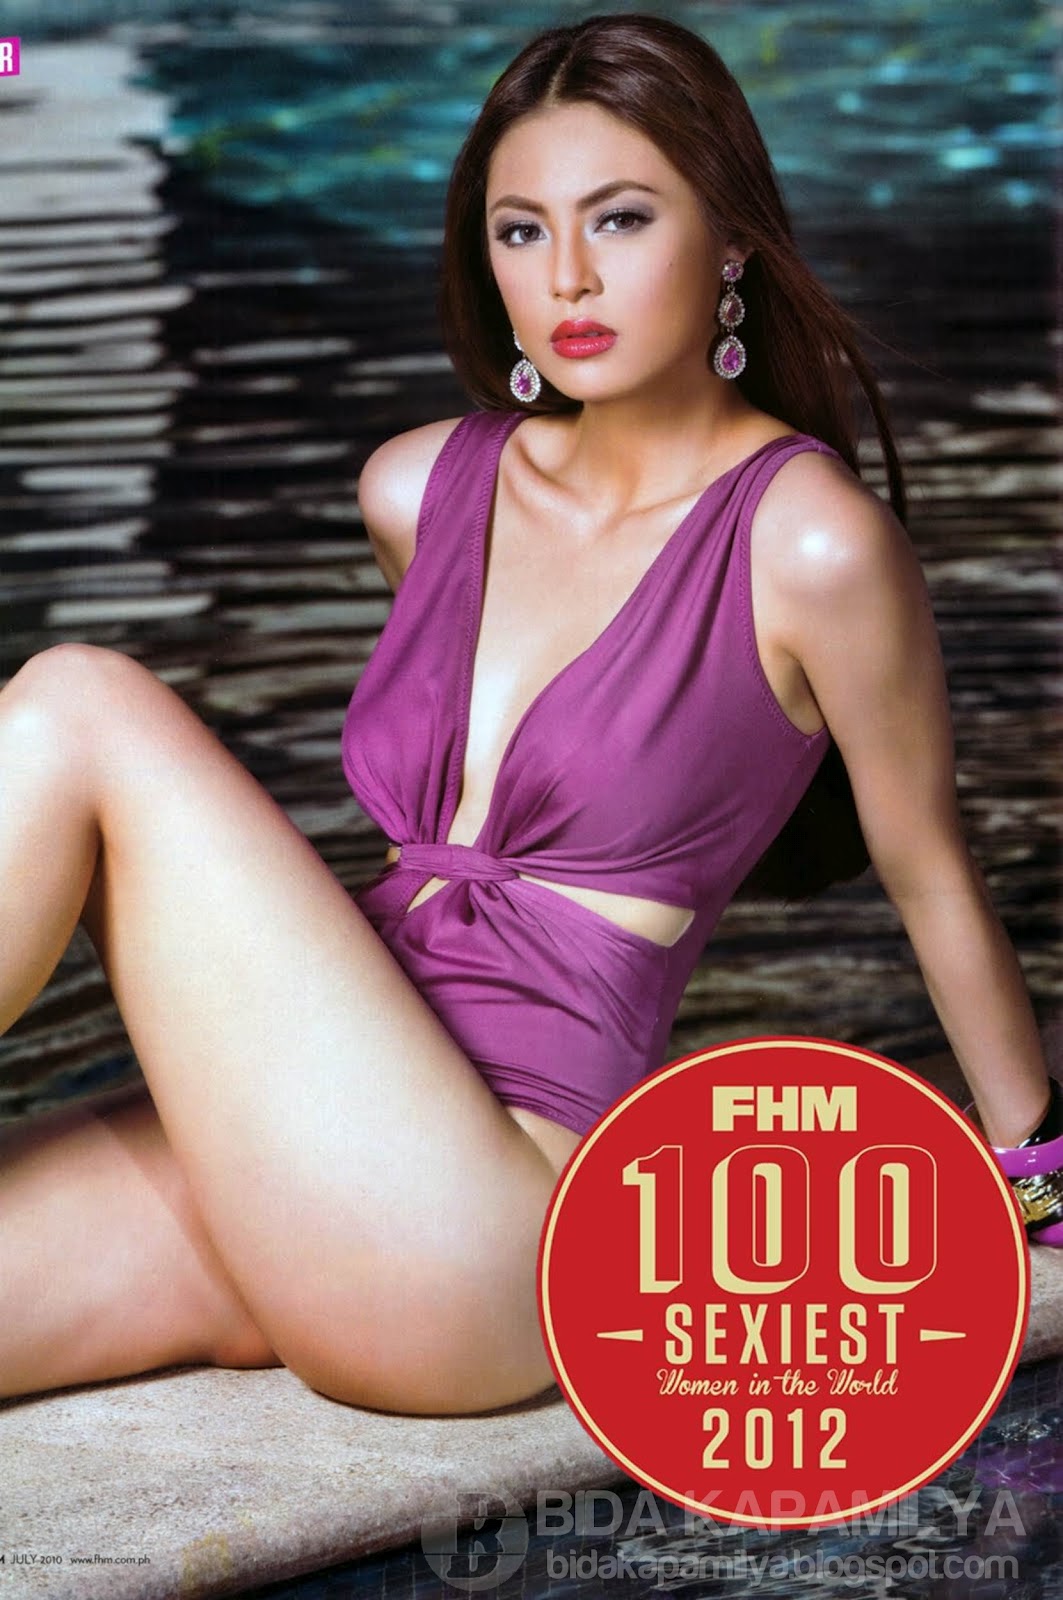 Download this Defended Her Crown The Philippines Sexiest Fhm Women picture